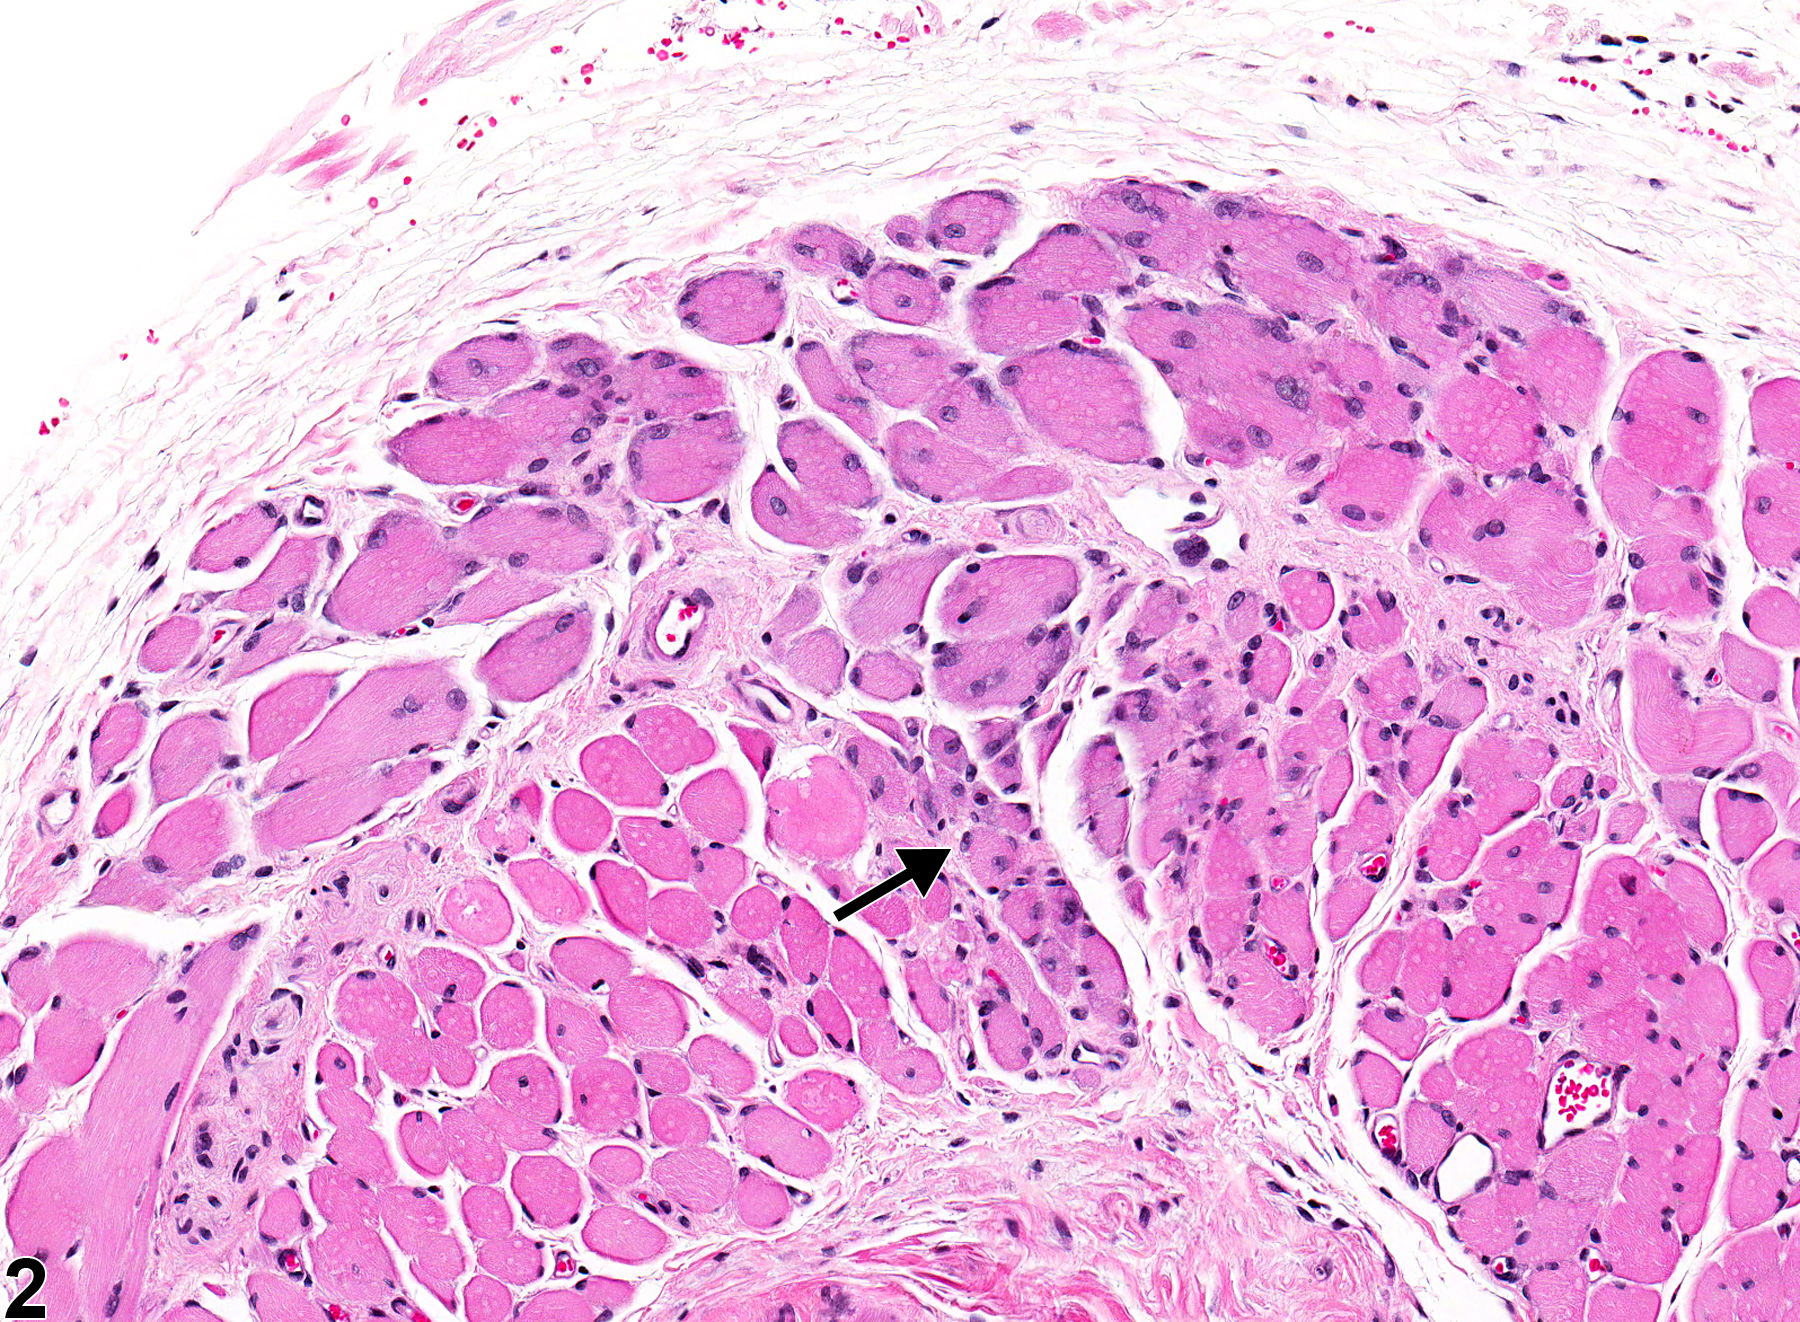 Image of degeneration in the esophagus muscularis from a male F344/N rat in a chronic study